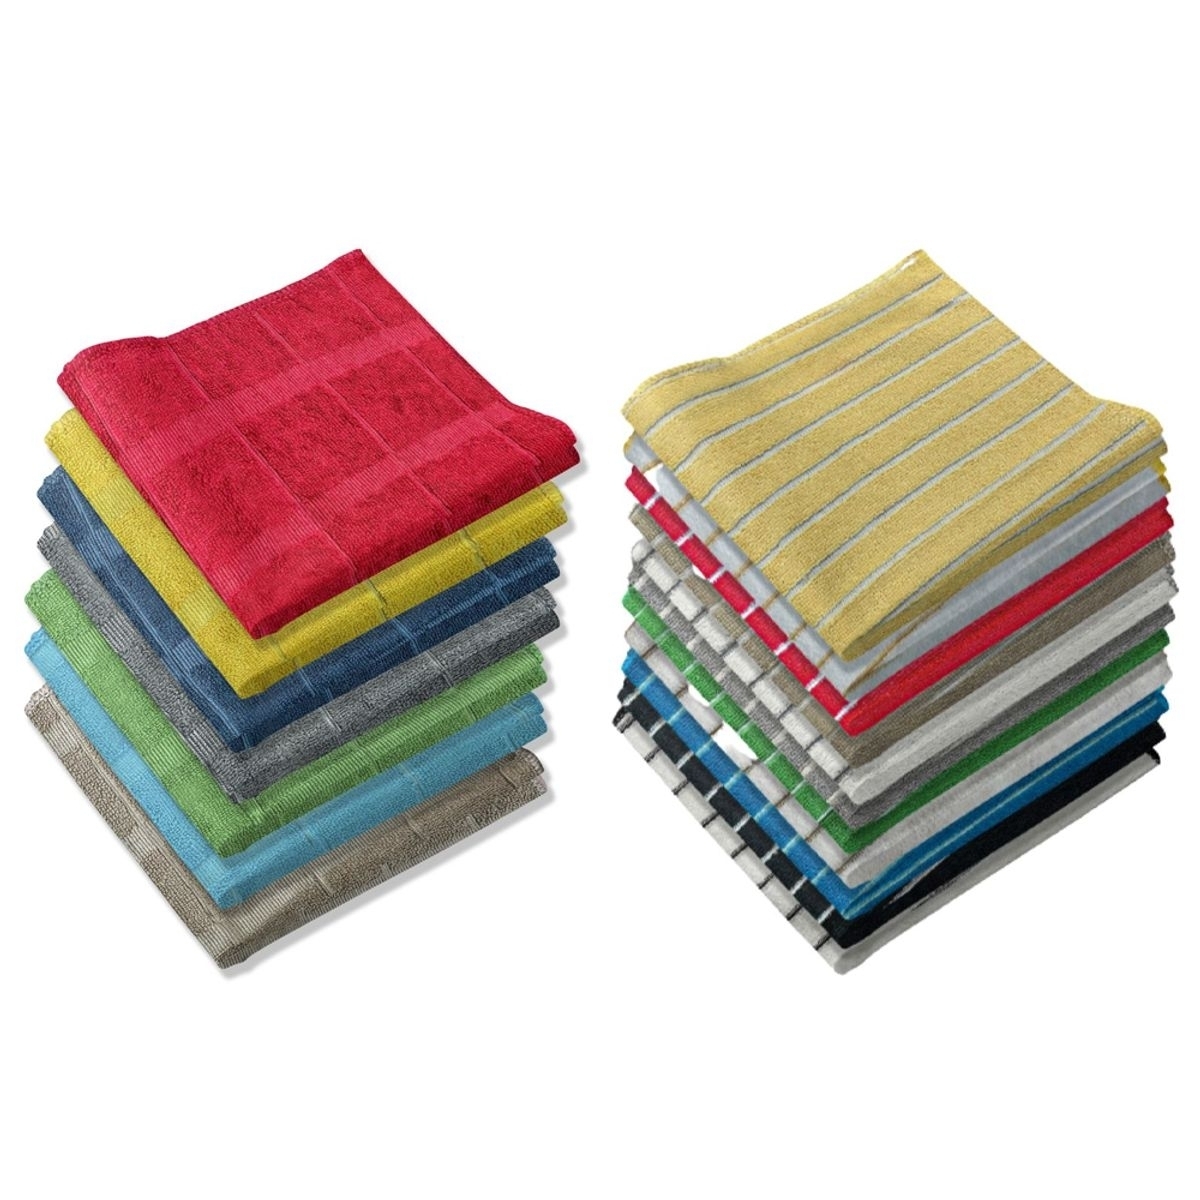 10-Pack: Ultra-Absorbent Multi Use Cleaning Super Soft Microfiber Dish Utility Rag Cloths - Waffle